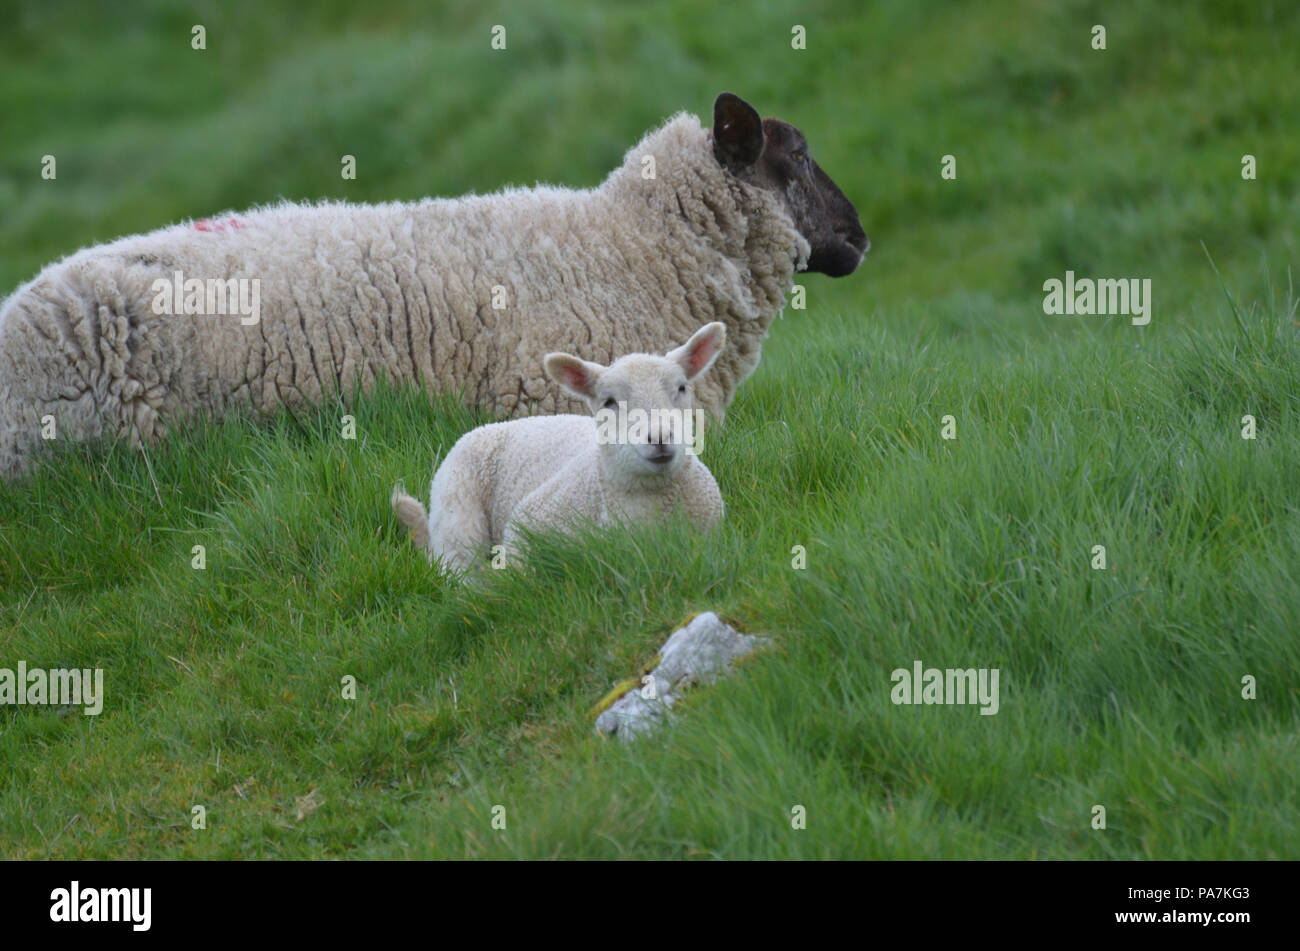 Cute white baby sheep in a remote location Stock Photo